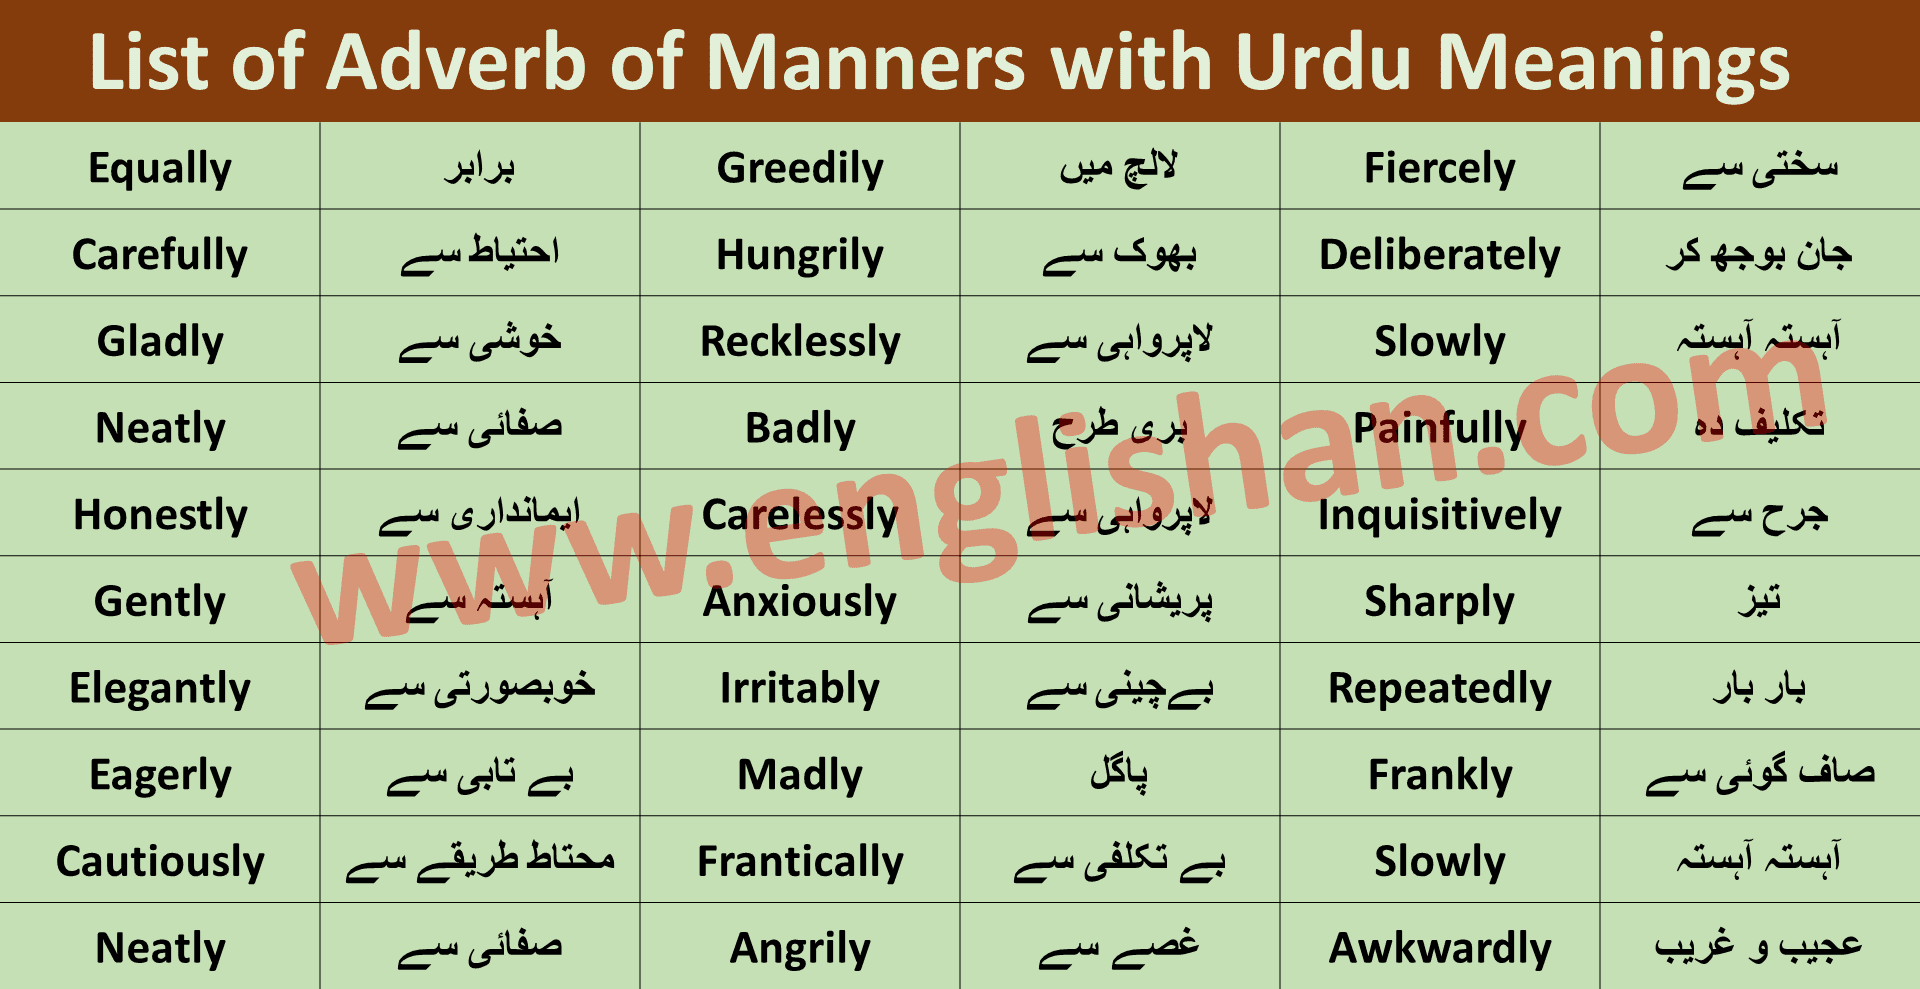 Adverb of Manners